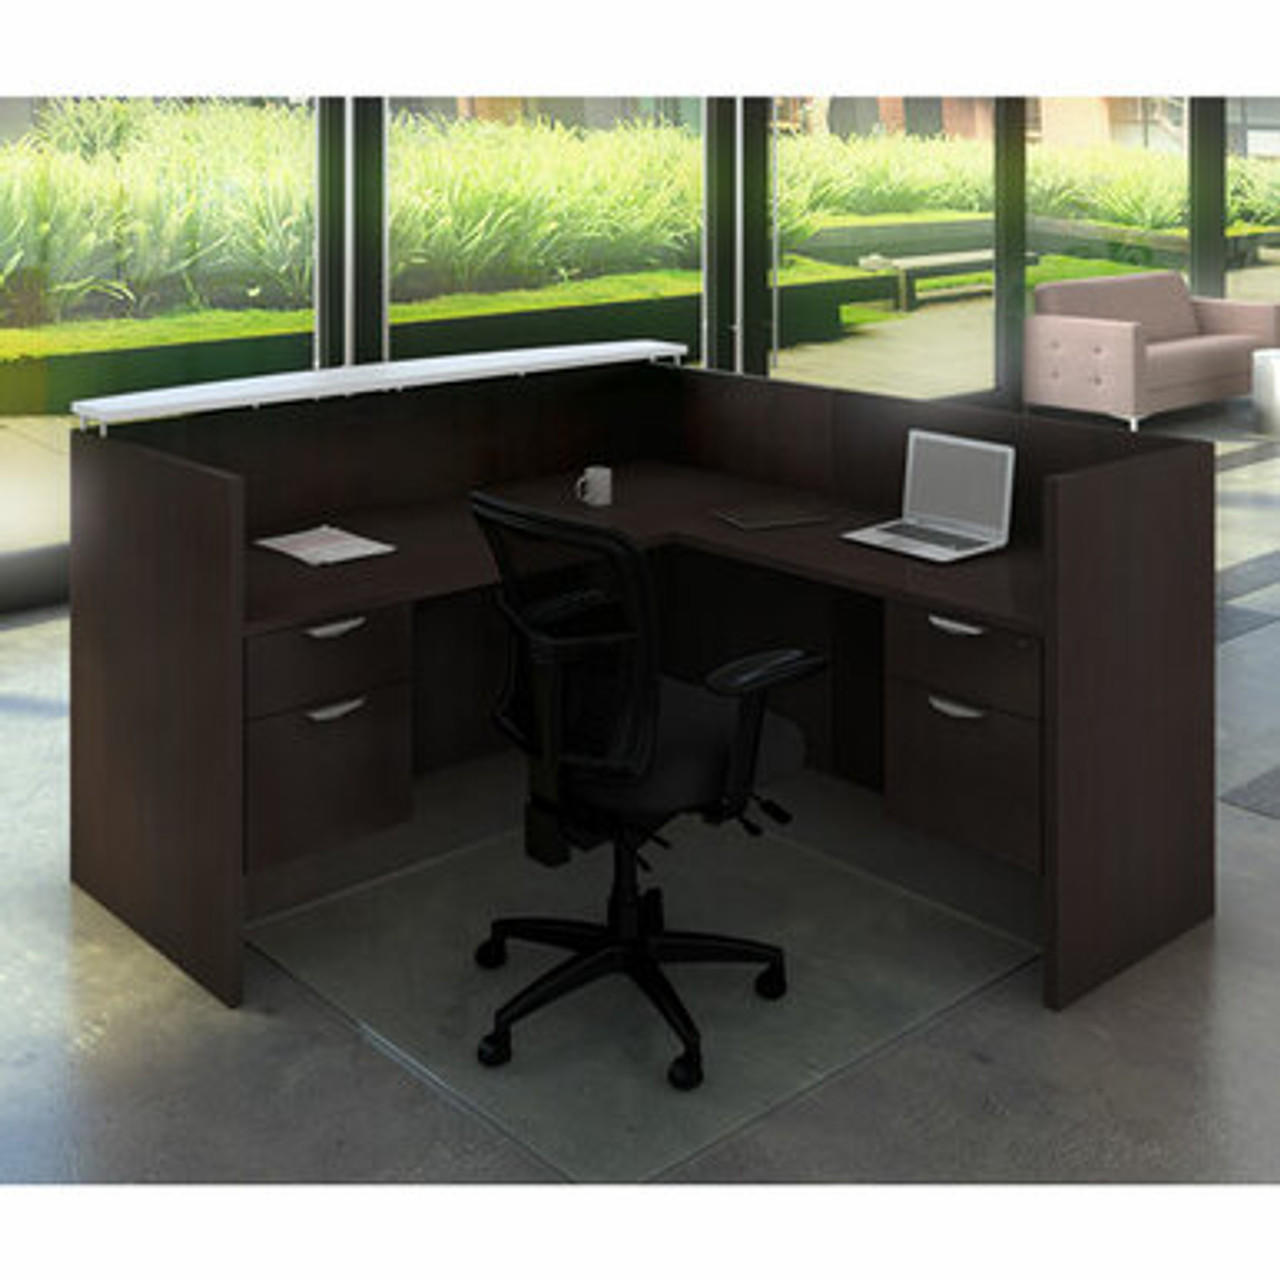  Office Source 71"W x 78"D L-Shaped Reception Desk with Floating Transaction Counter OS97 